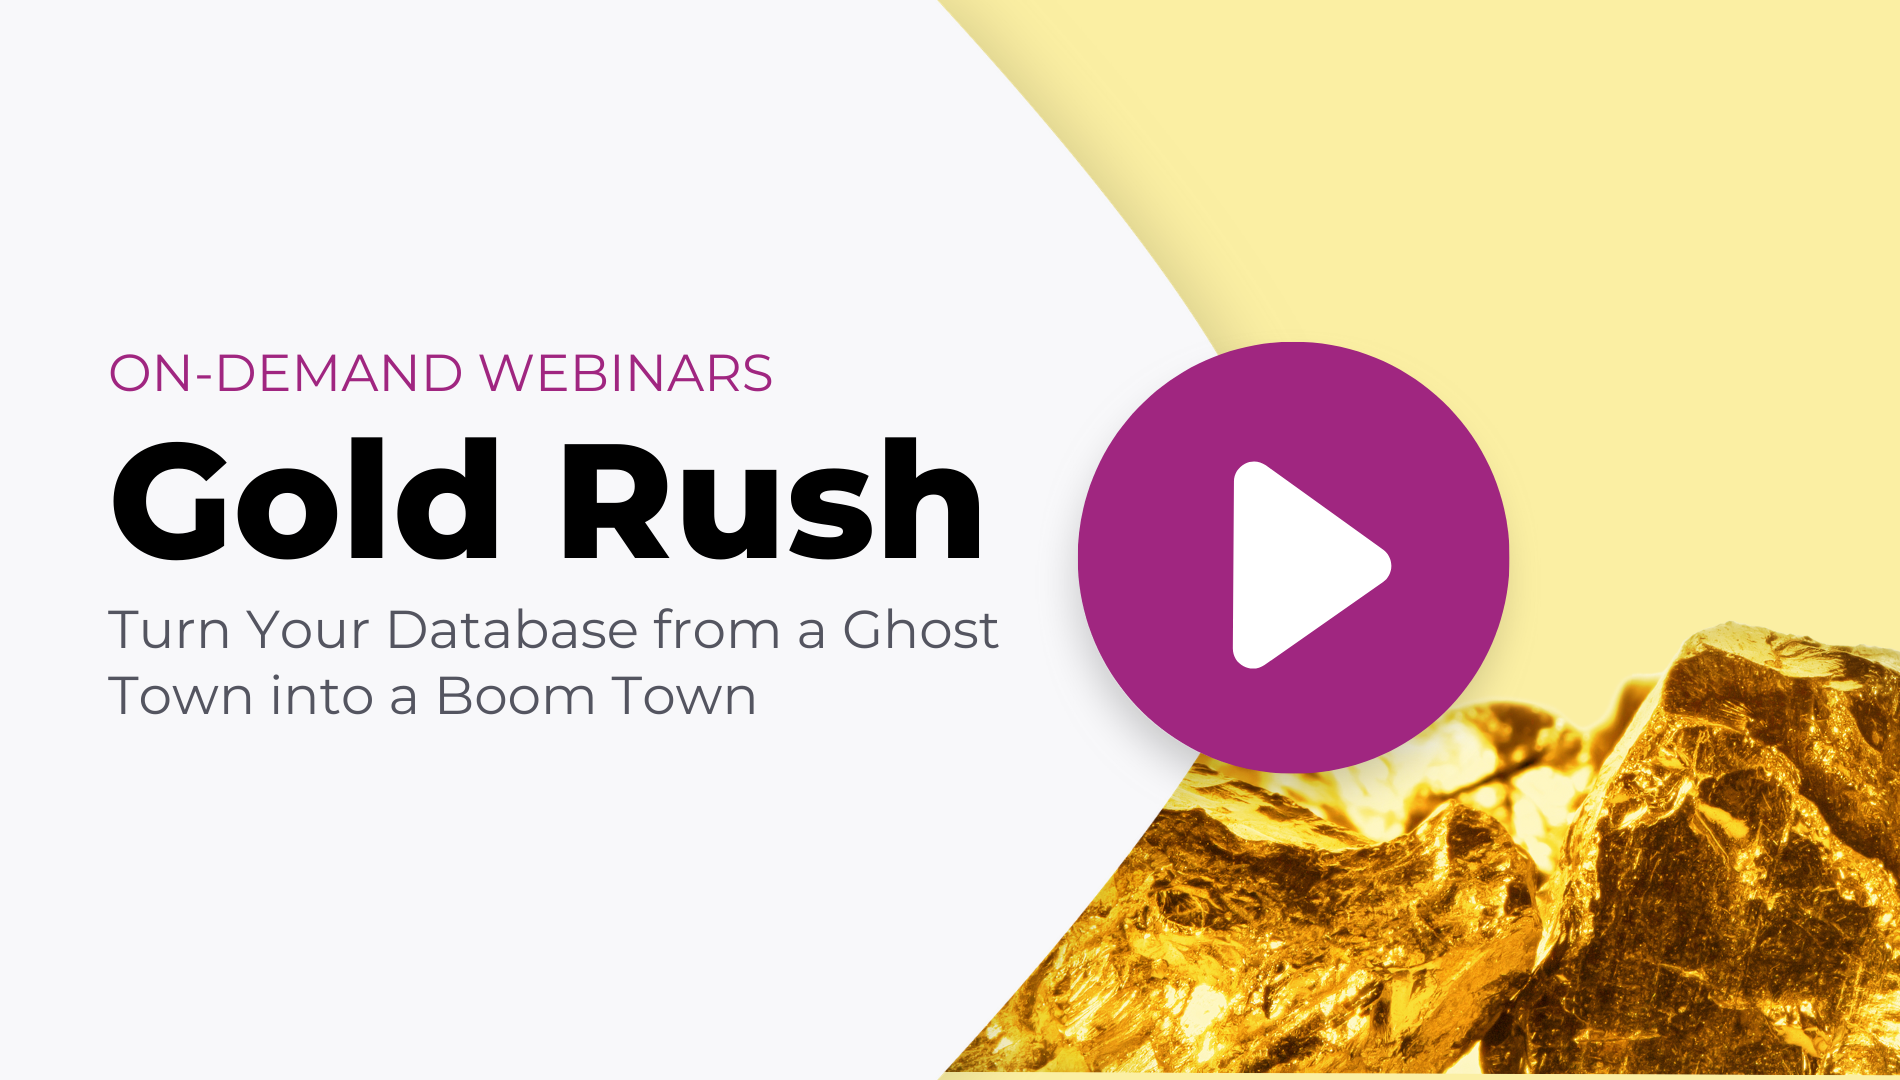 Gold Rush: Turn Your Database from a Ghost Town into a Boom Town